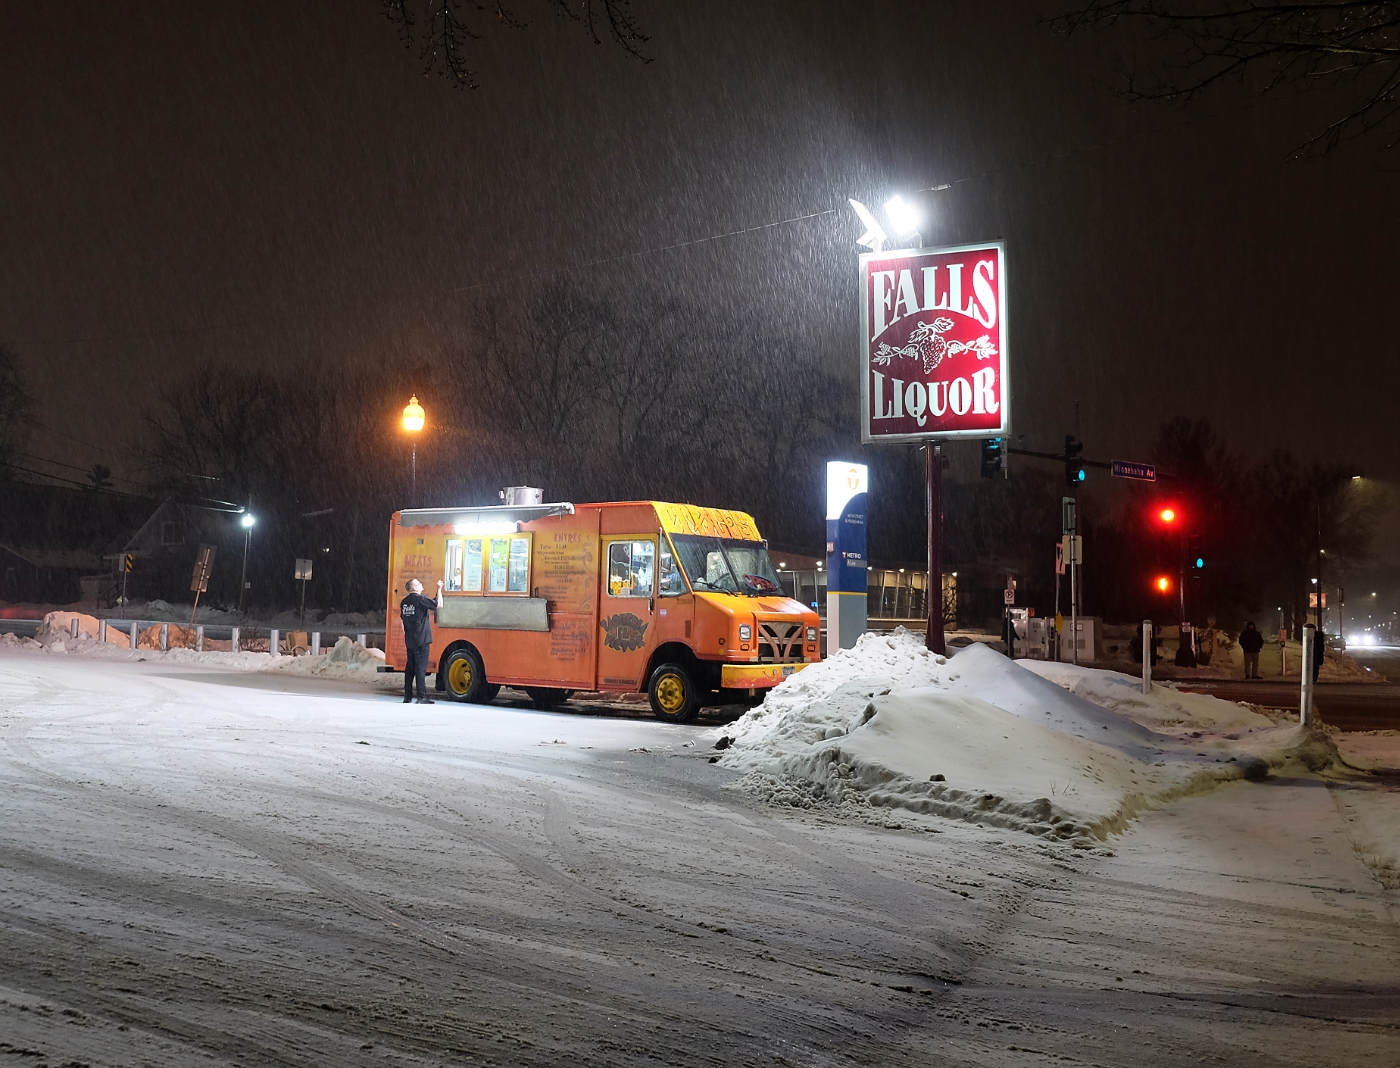 Snowy parking lot at night with an orange food truck under a street light with a person ordering at the truck window, and a red and white FALLS LIQUOR sign next to it